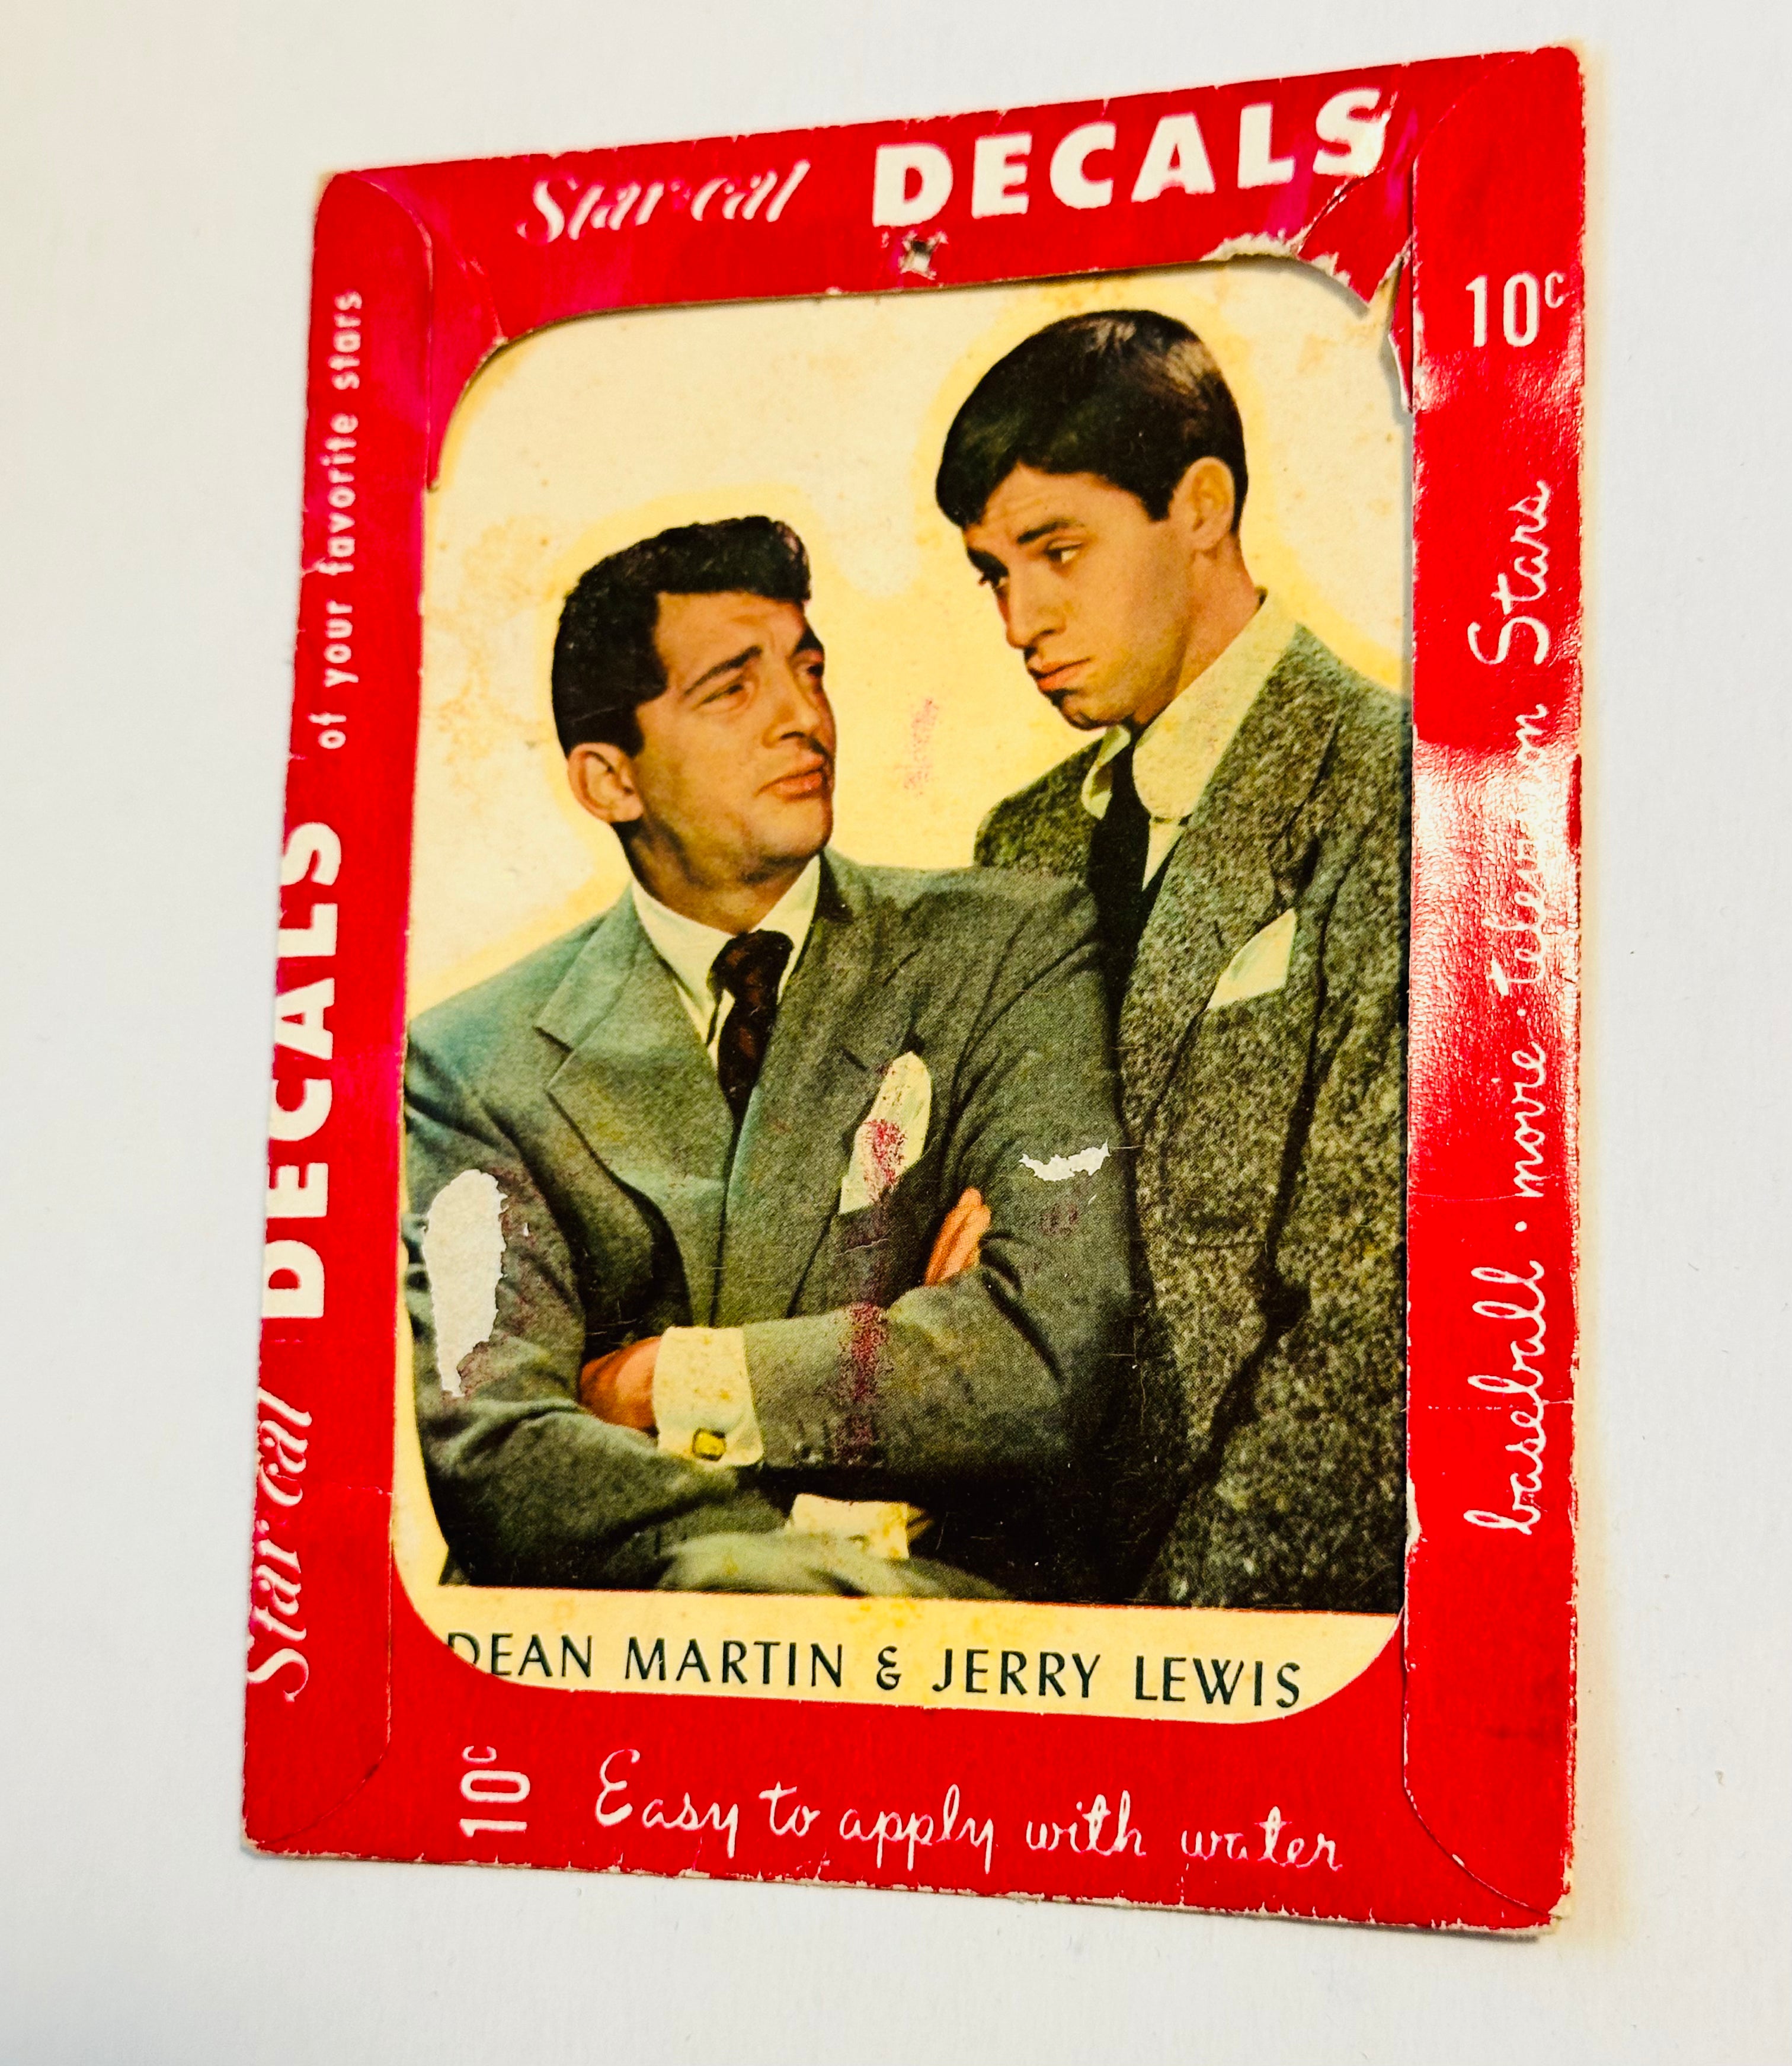 Dean Martin and Jerry Lewis rare Star Cal decal 1950s